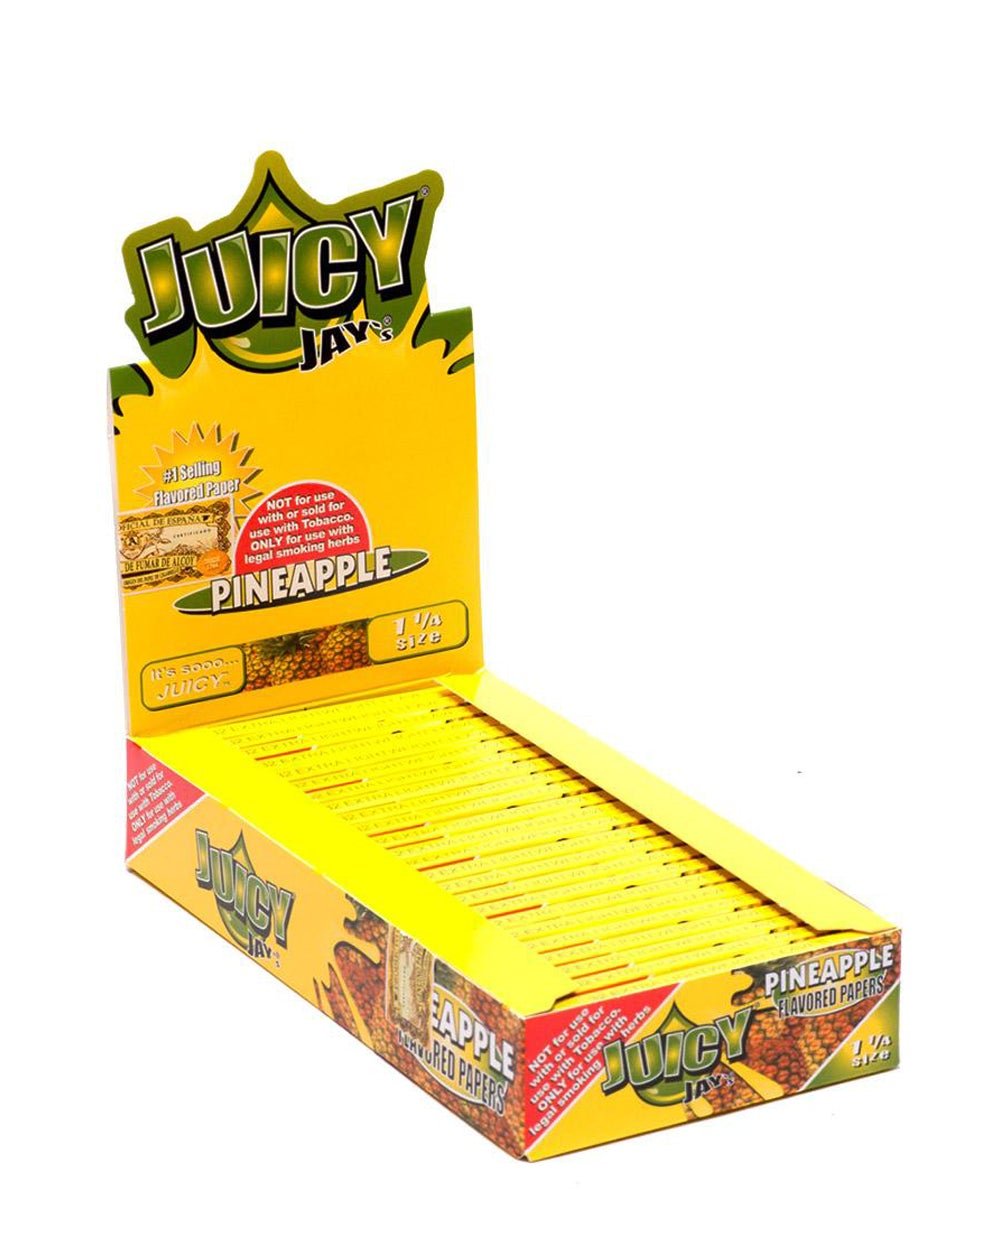 JUICY JAY'S | 'Retail Display' 1 1/4 Size Hemp Rolling Papers | 76mm - Pineapple - 24 Count - 1